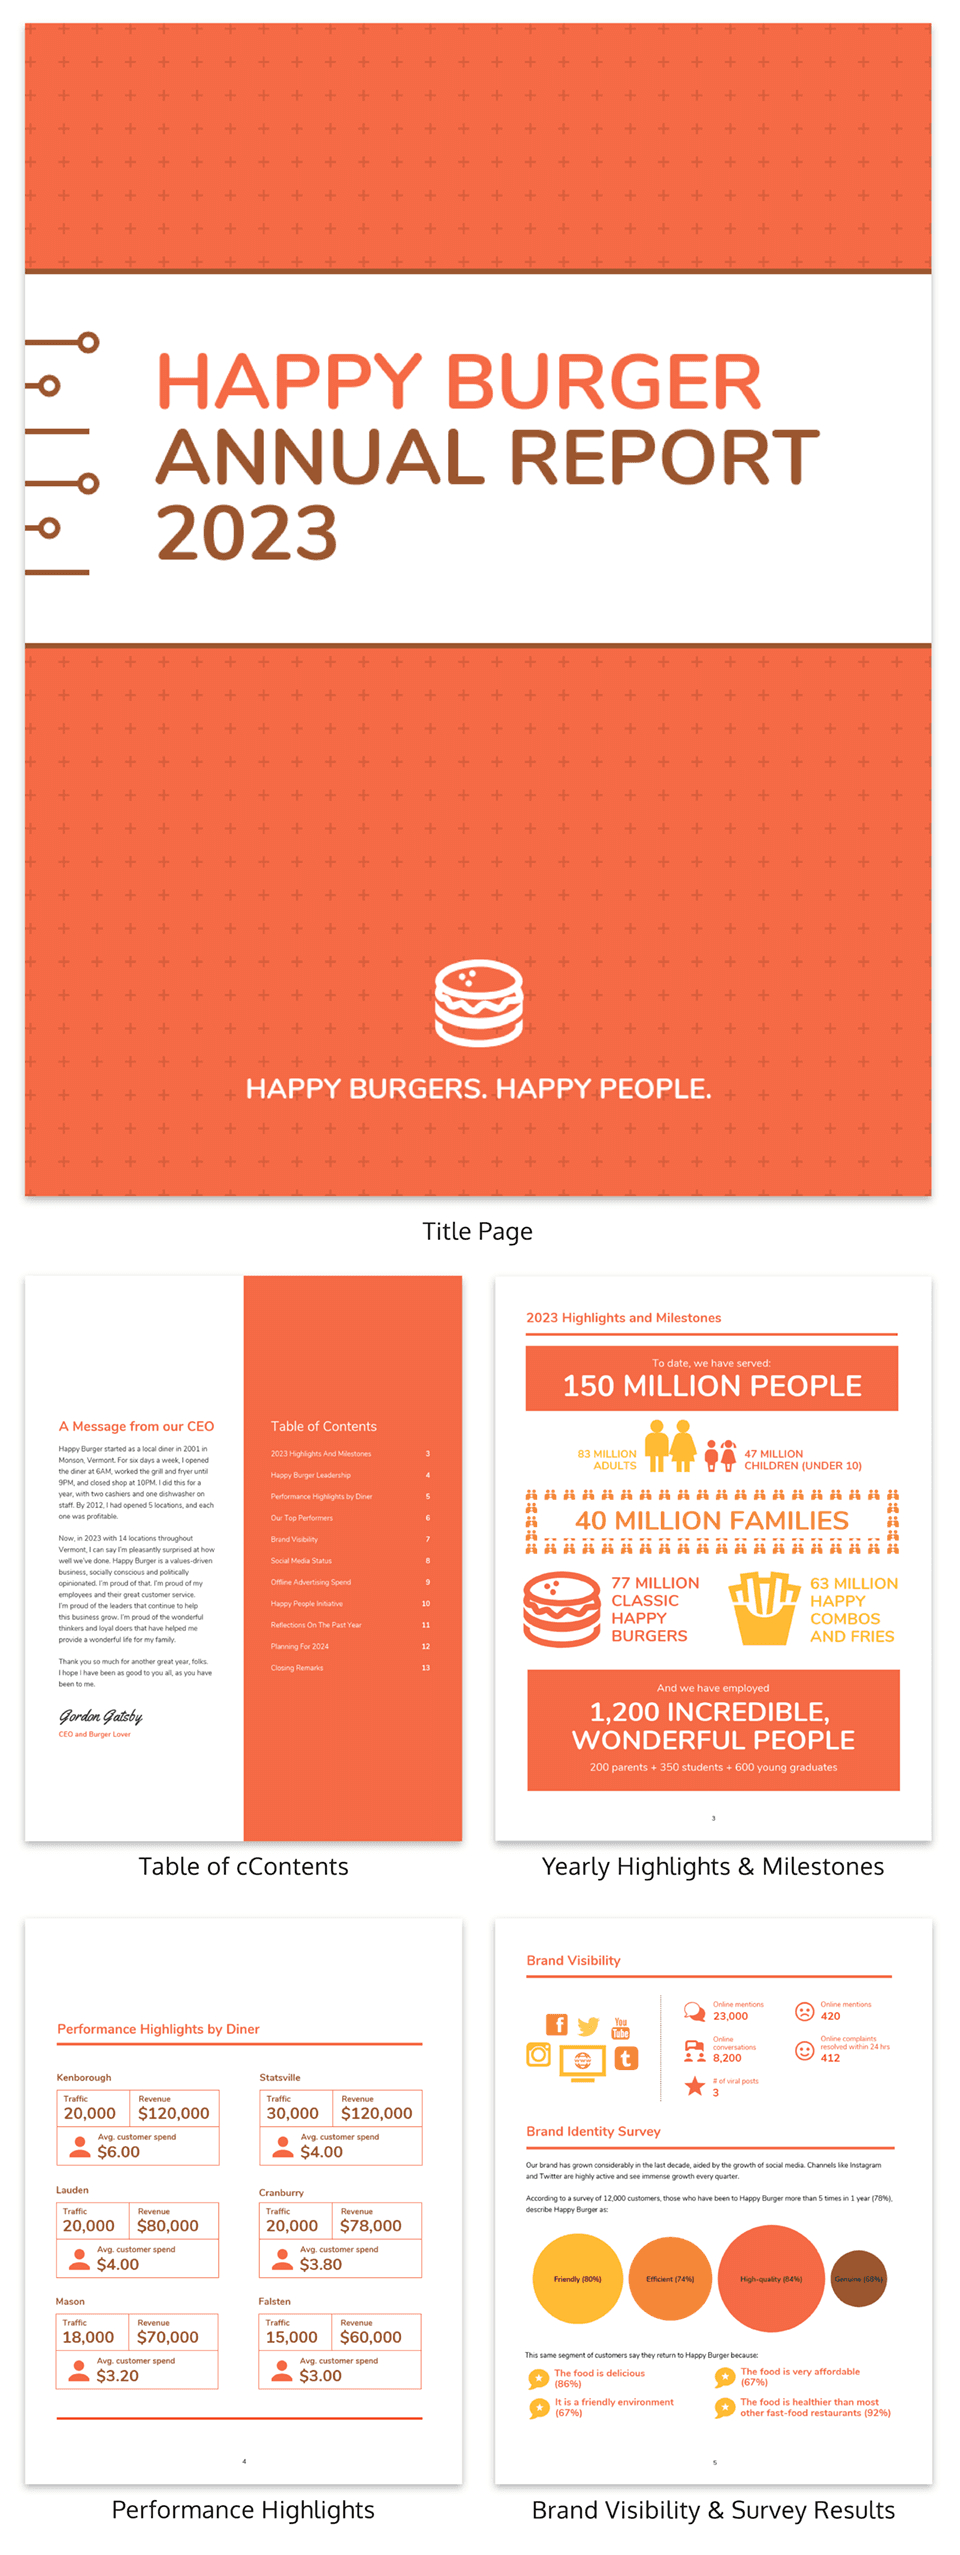 55+ Annual Report Design Templates & Inspirational Examples Within Annual Report Template Word